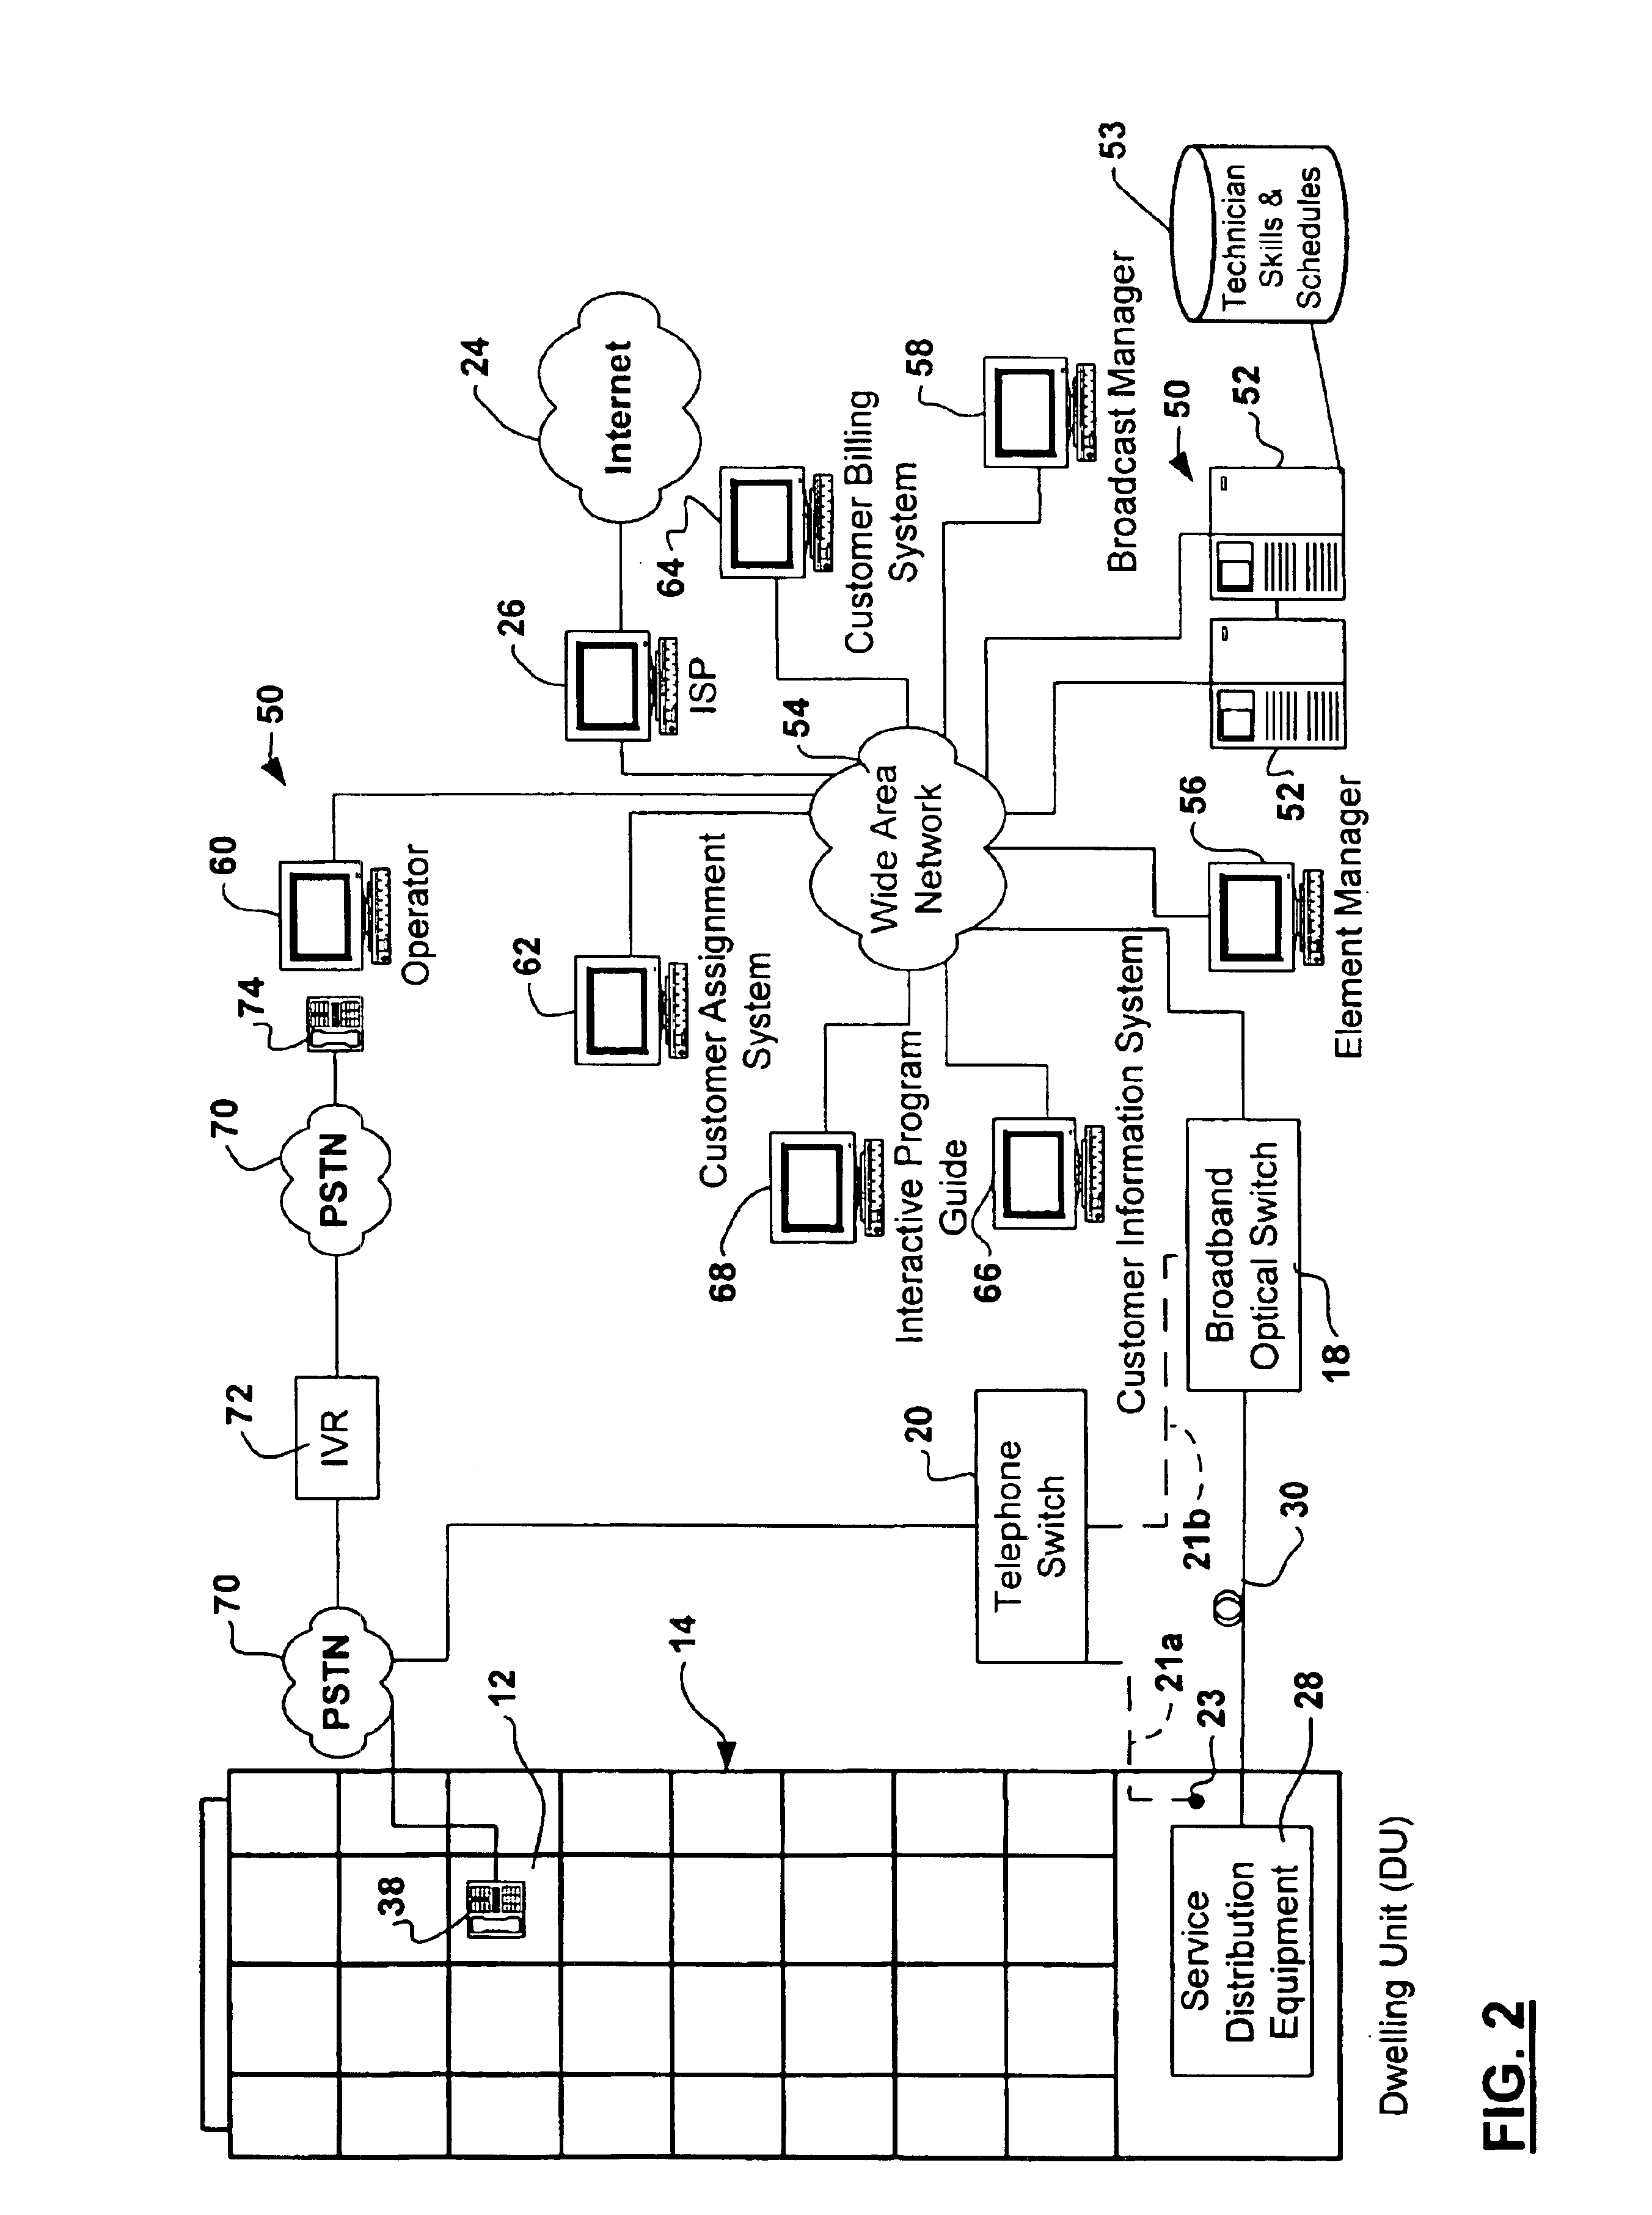 Method and system for facilitating telecommunications service provisioning and service assurance